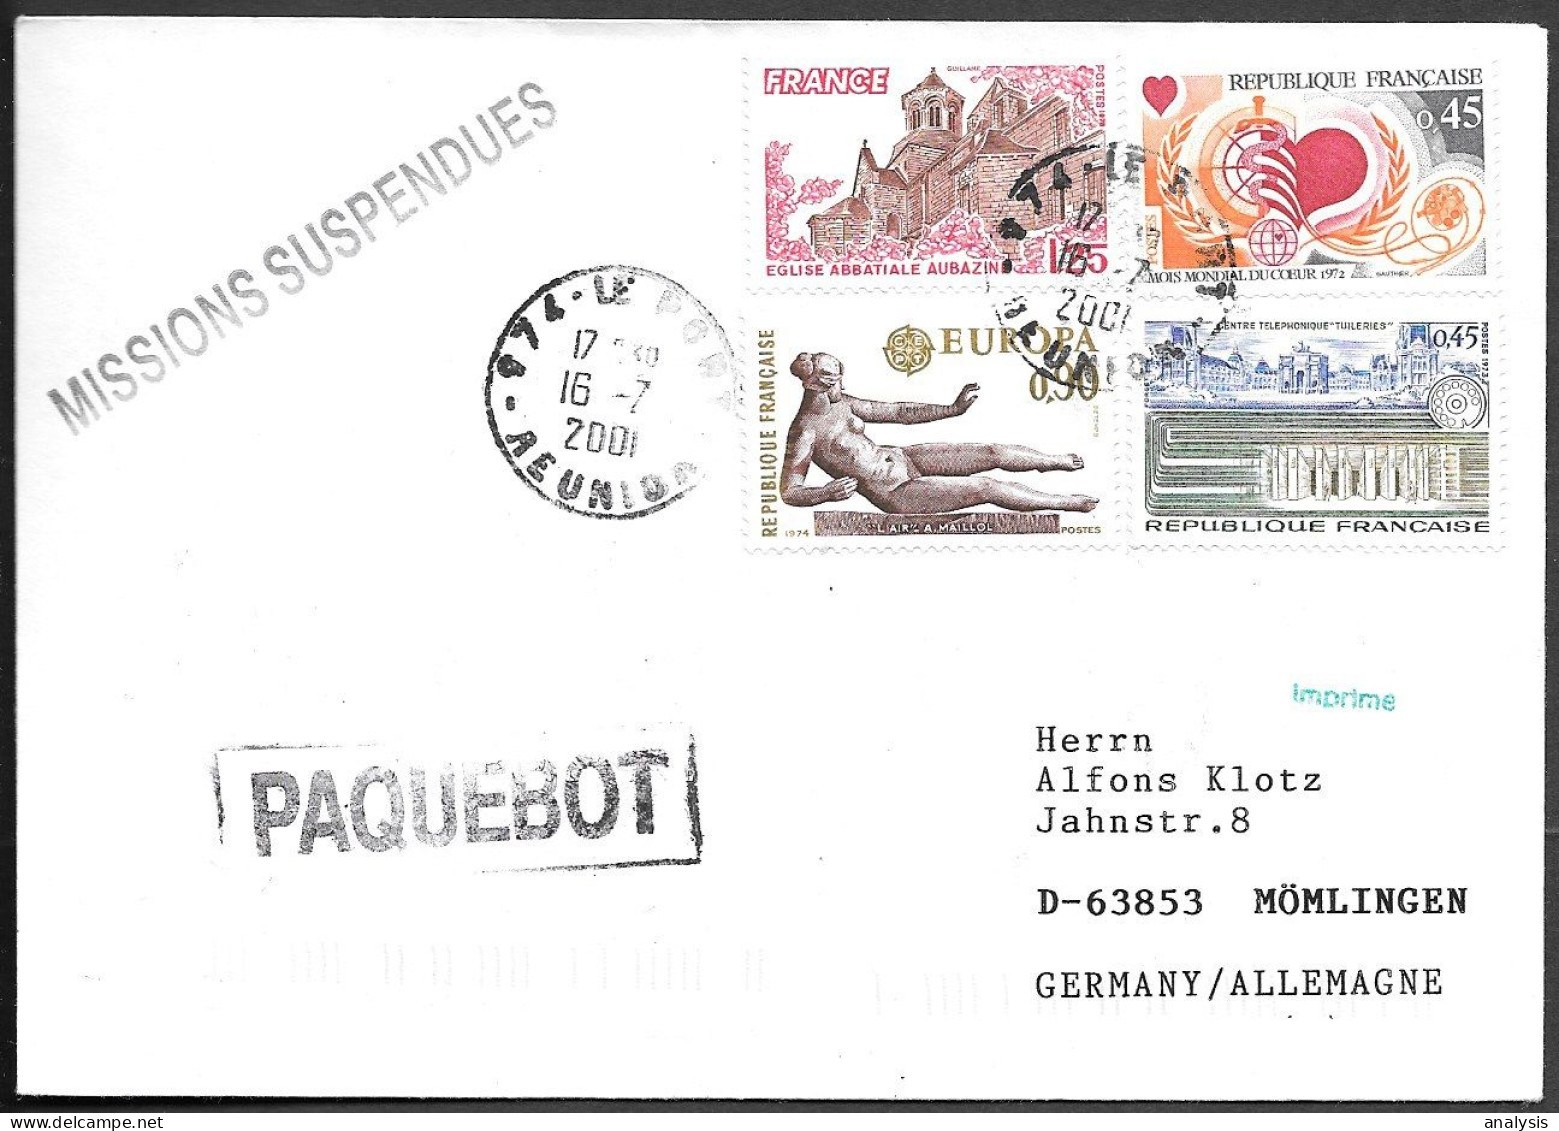 Reunion Paquebot Cover Mailed To Germany 2001 - Covers & Documents